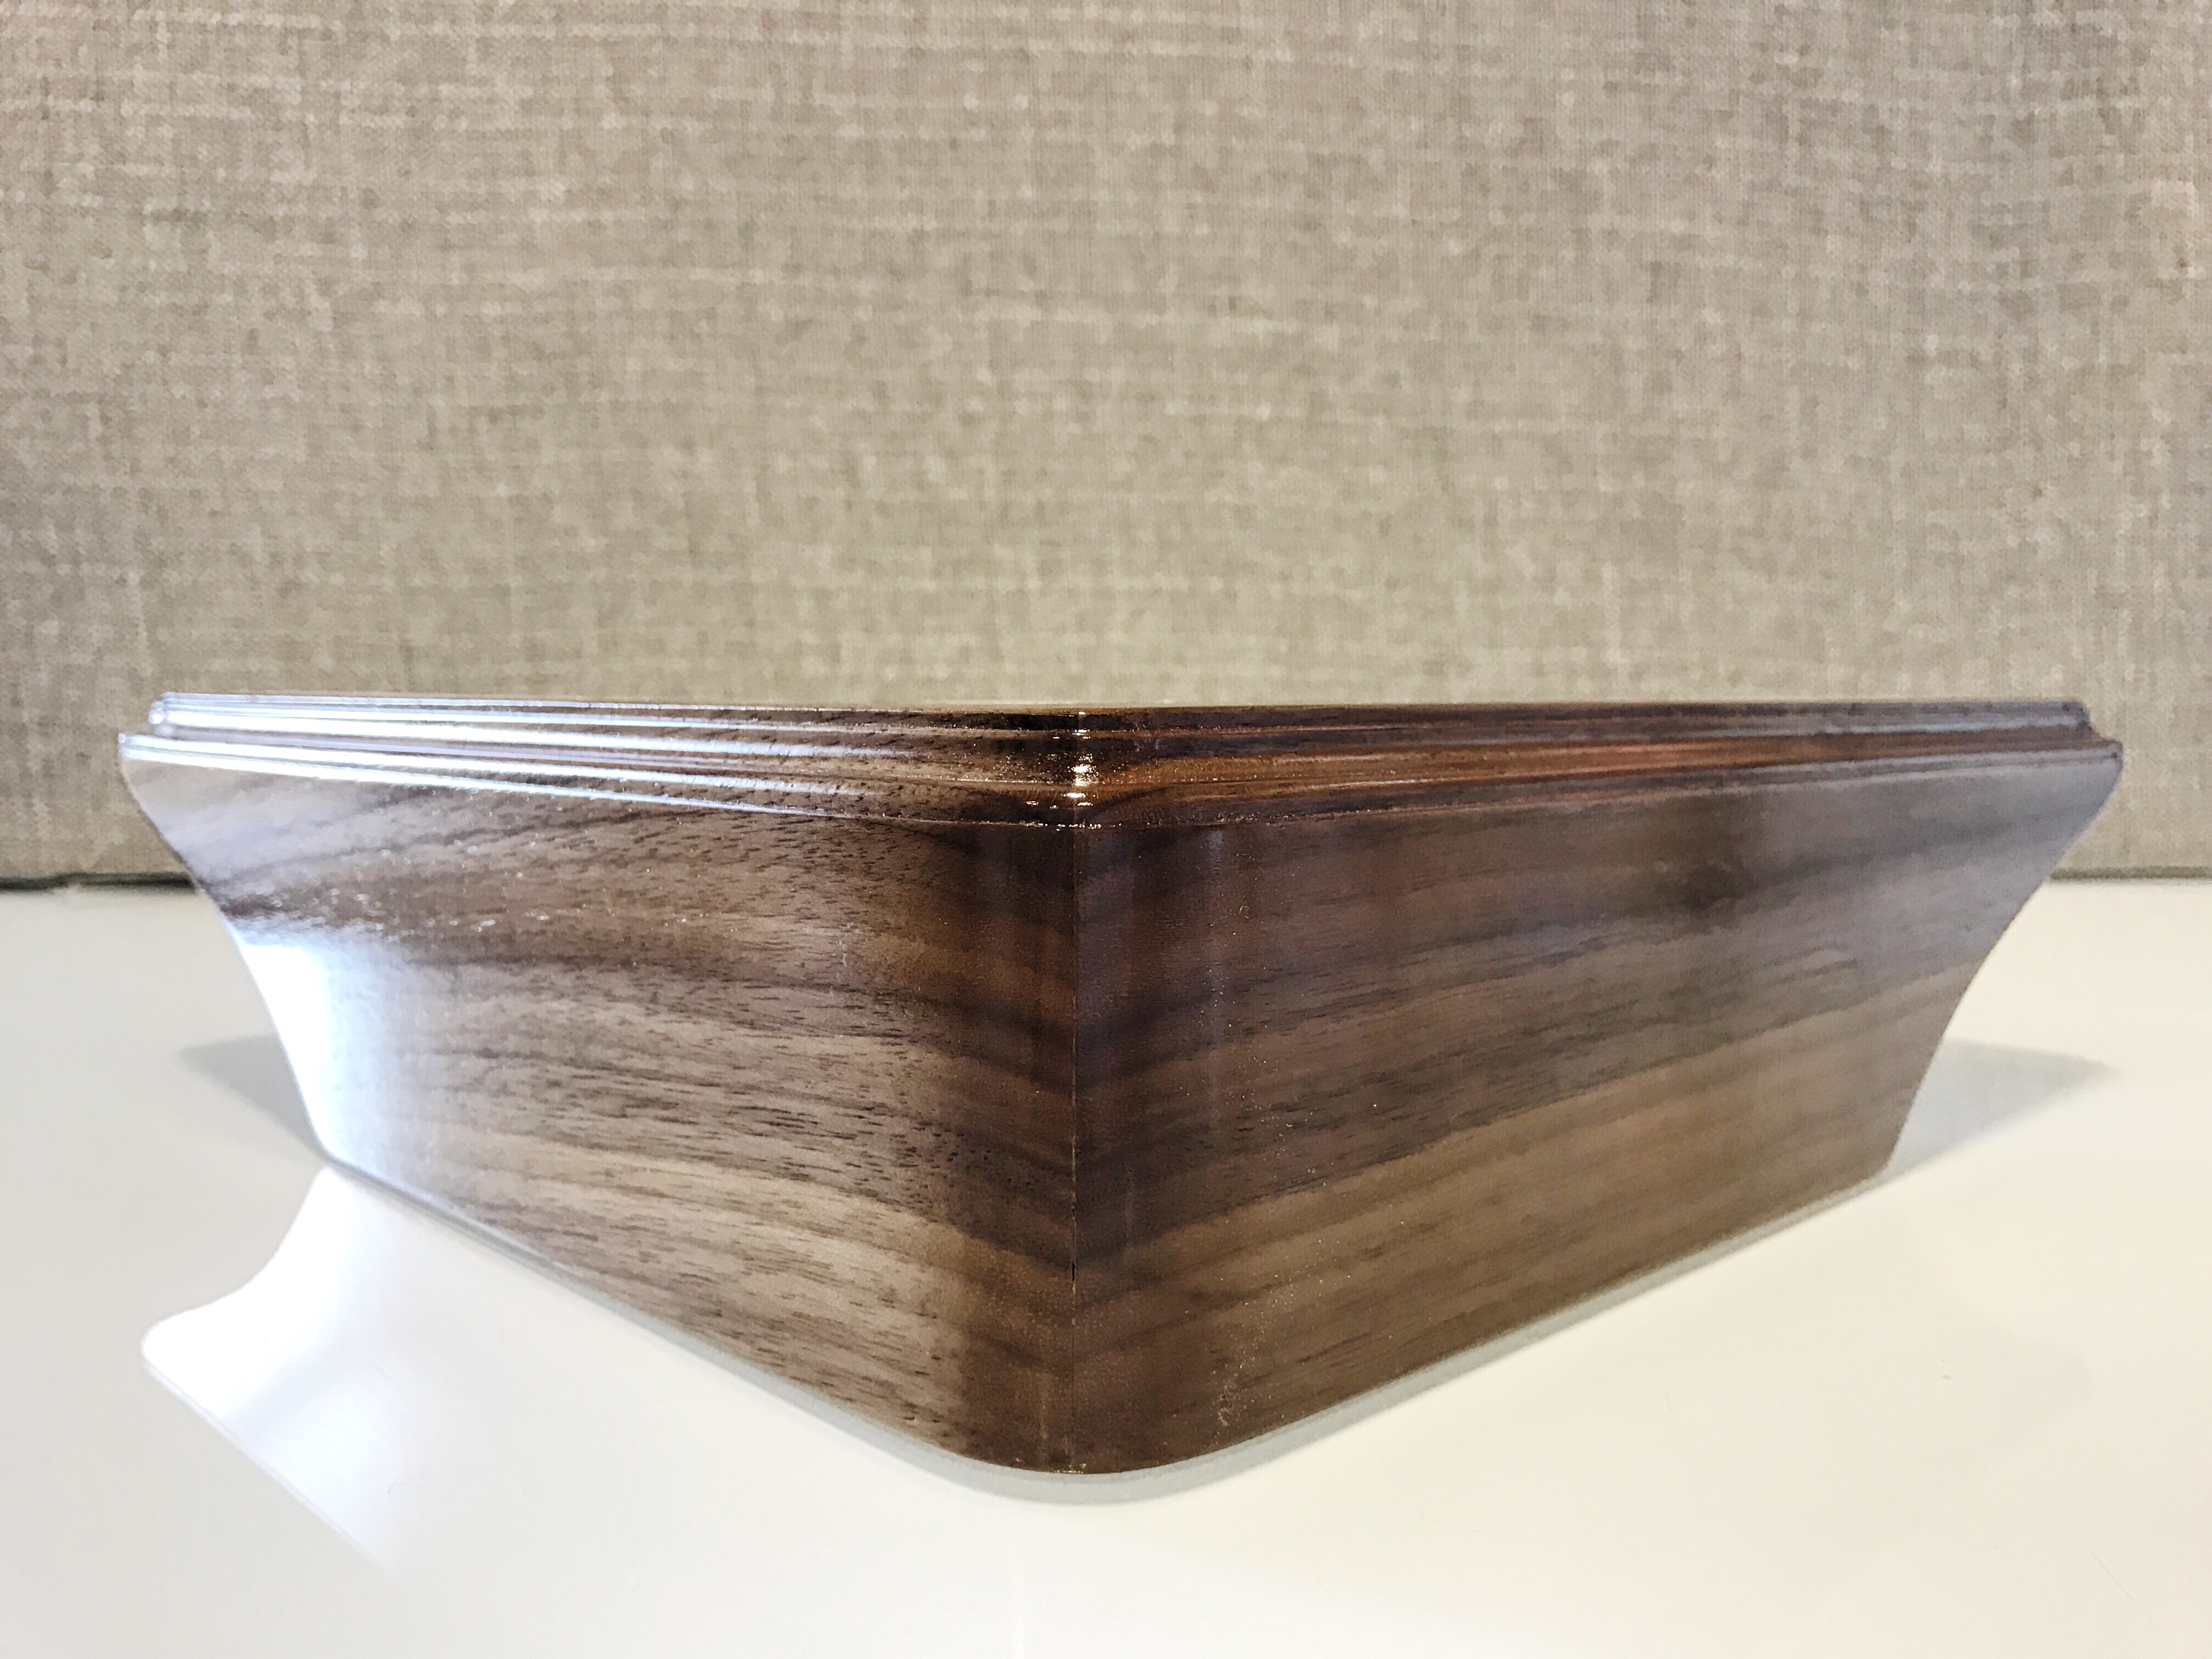 How beautiful is the book-matched walnut on the Joni leg? Can't wait to see it all put together!